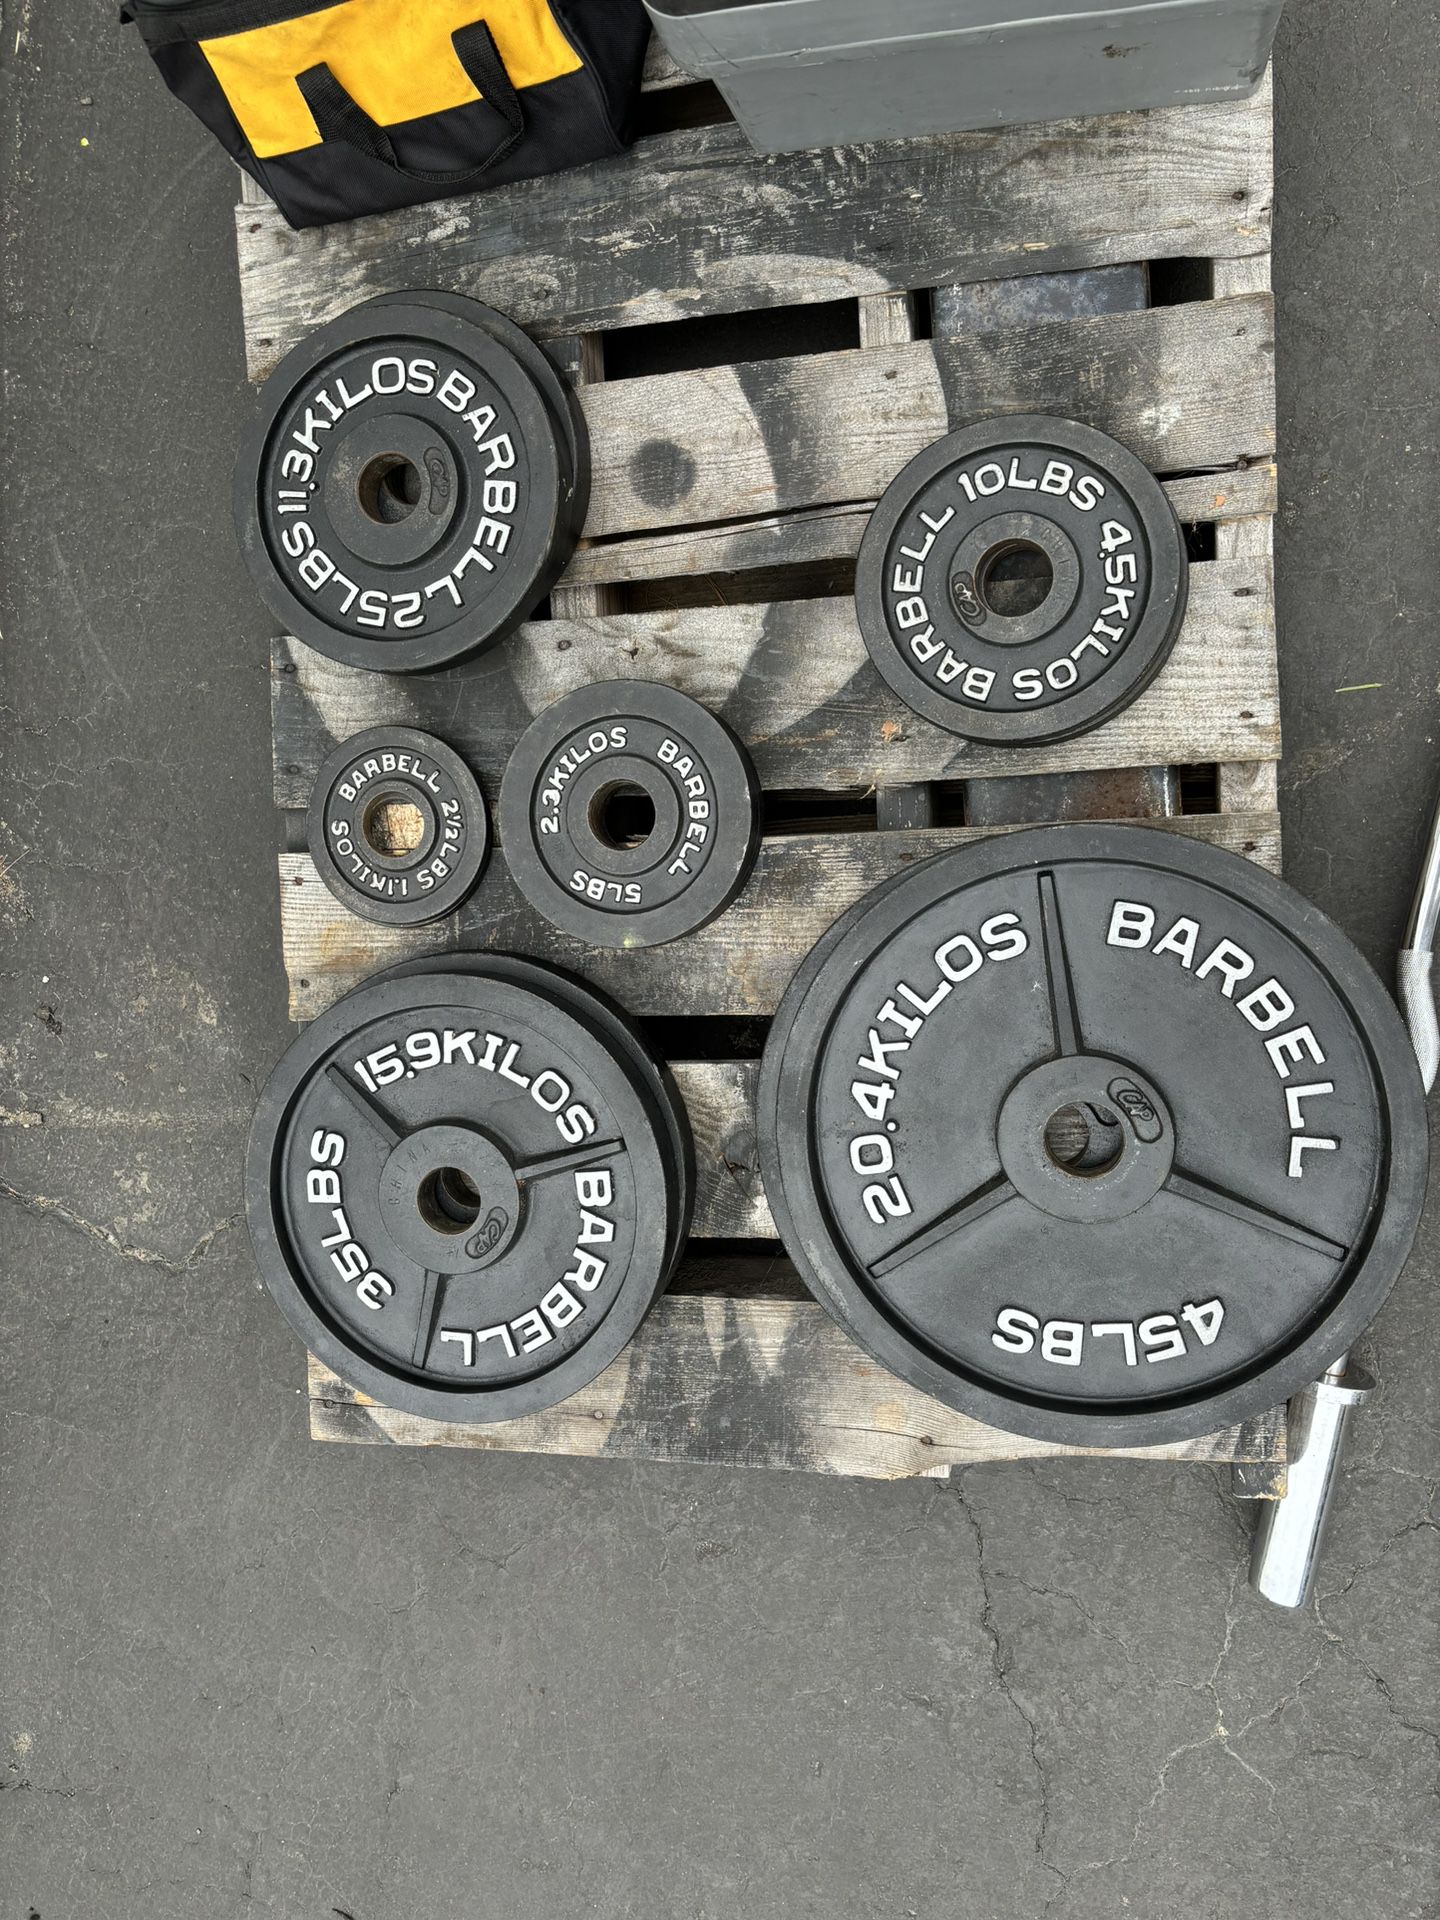 Olympic Weight Plates 